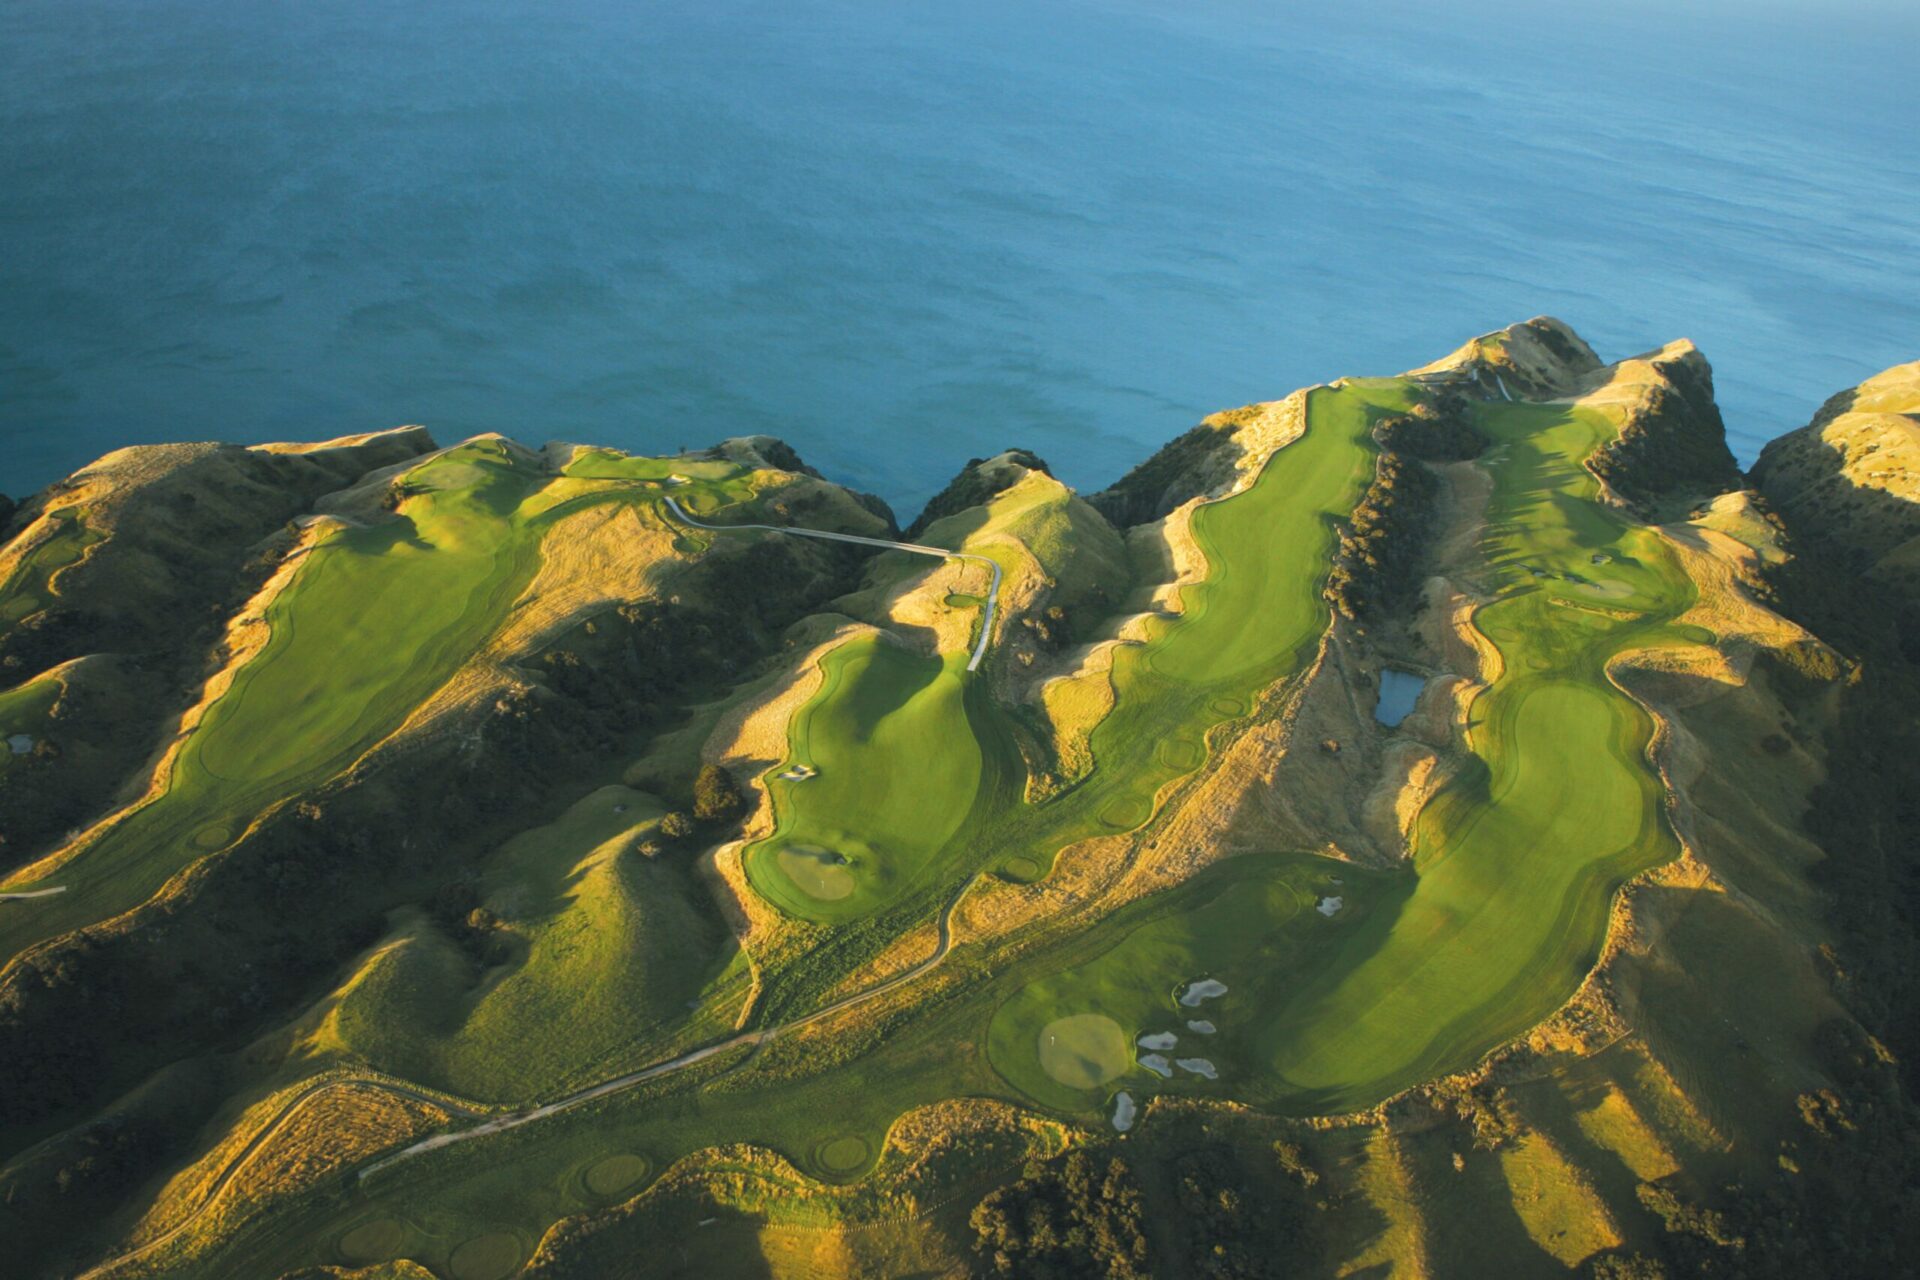 Visit Cape Kidnappers Golf Course on your next golf safari